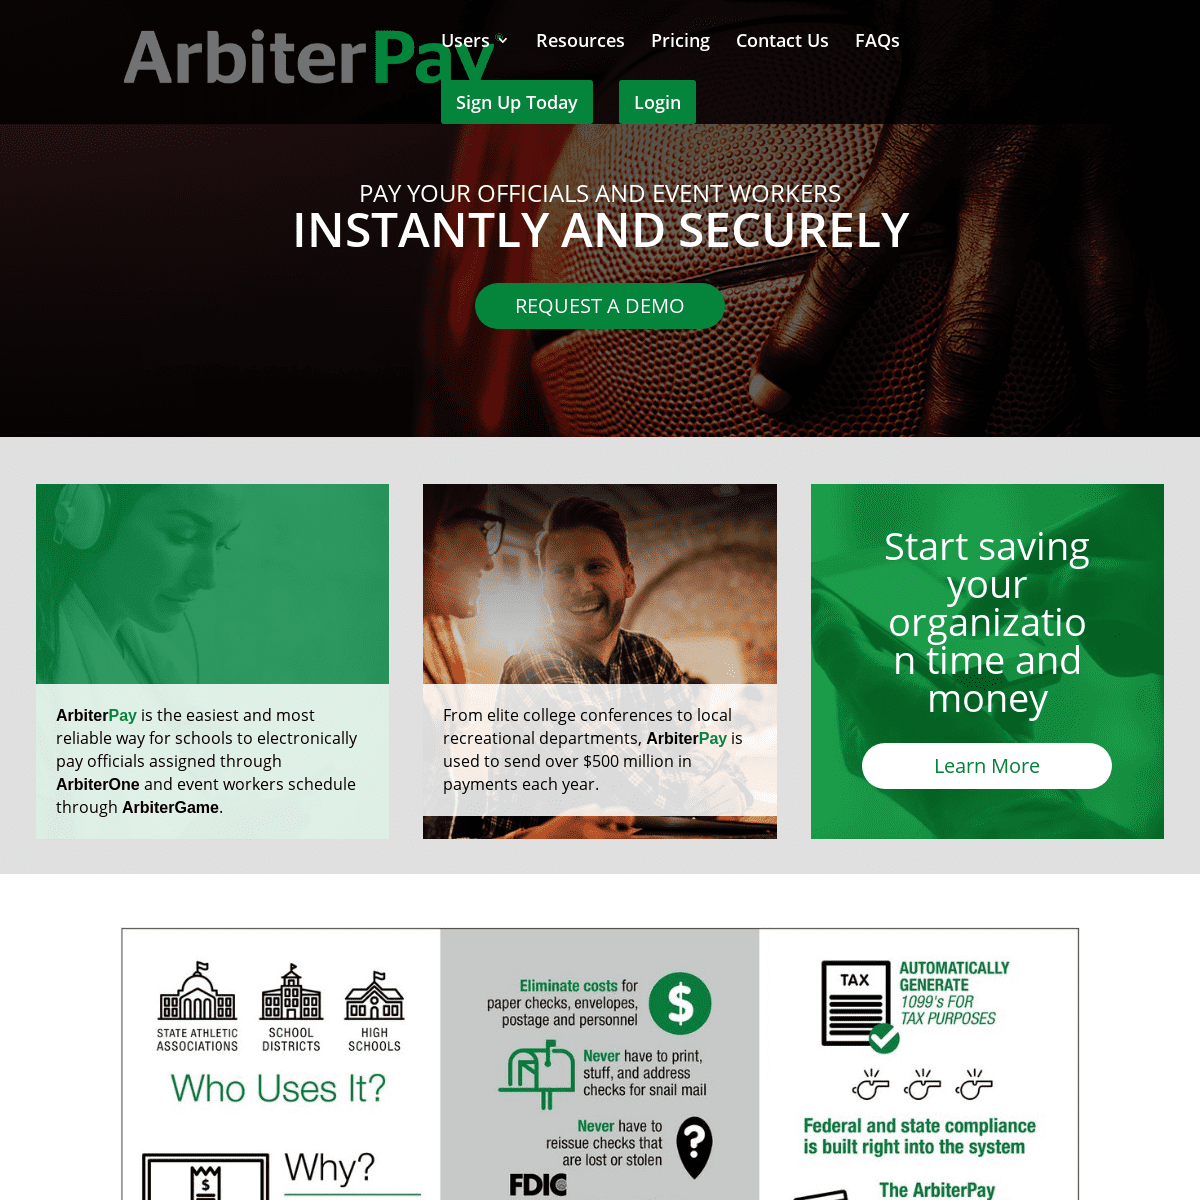 A complete backup of arbiterpay.com